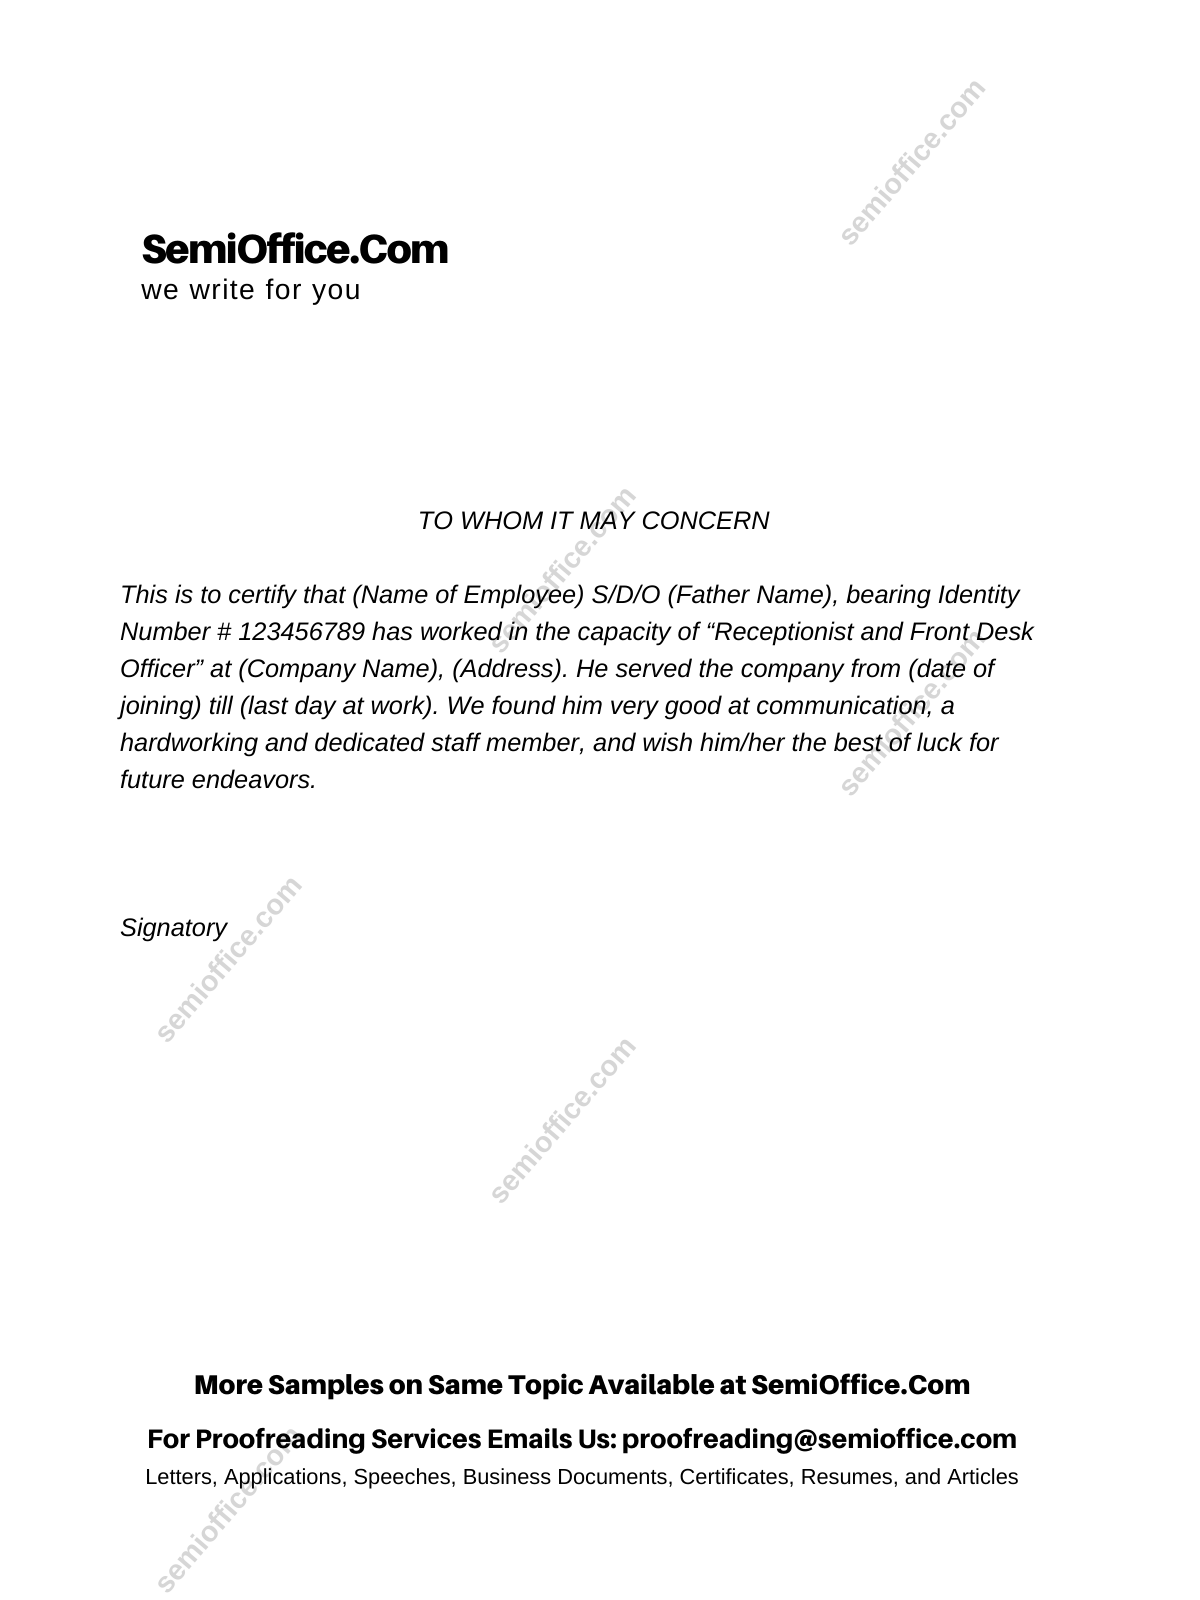 Experience Letter for Receptionist Free Sample  SemiOffice.Com